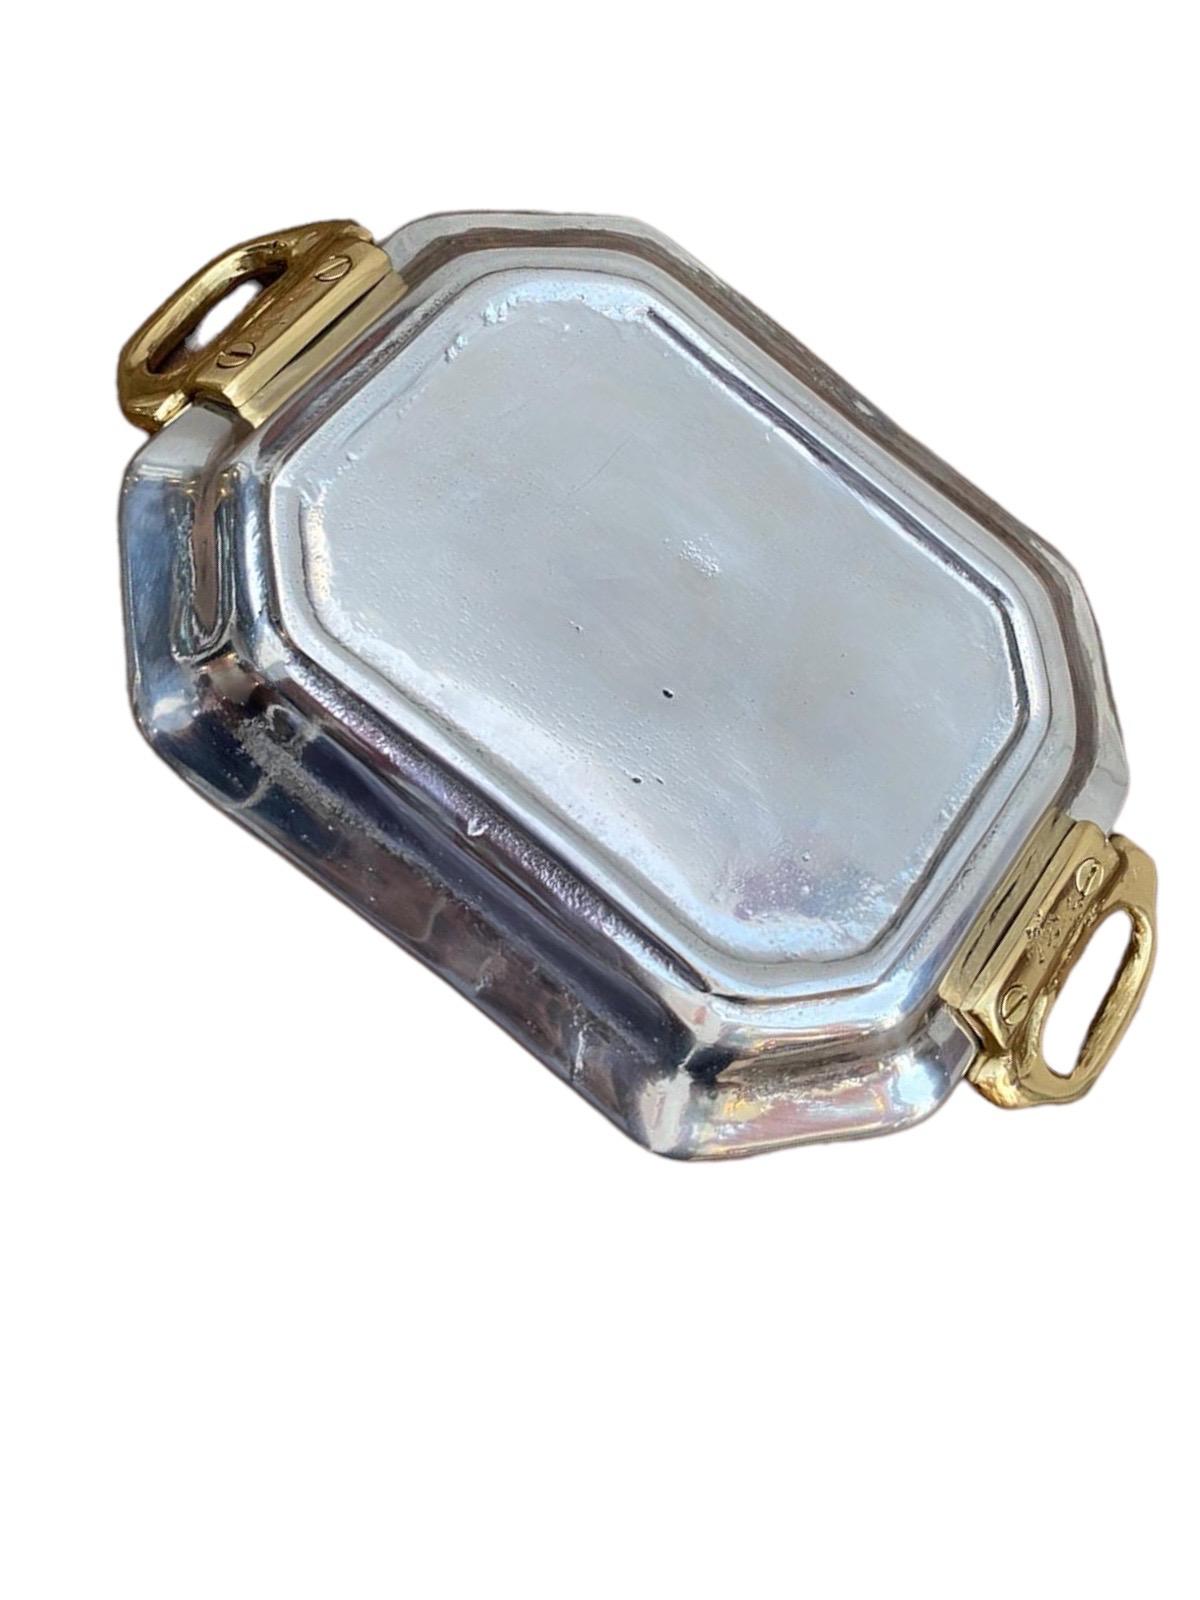 Brutalist Octagonal Card Tray E006 Silver and Gold Desk Tray Handmade in Spain For Sale